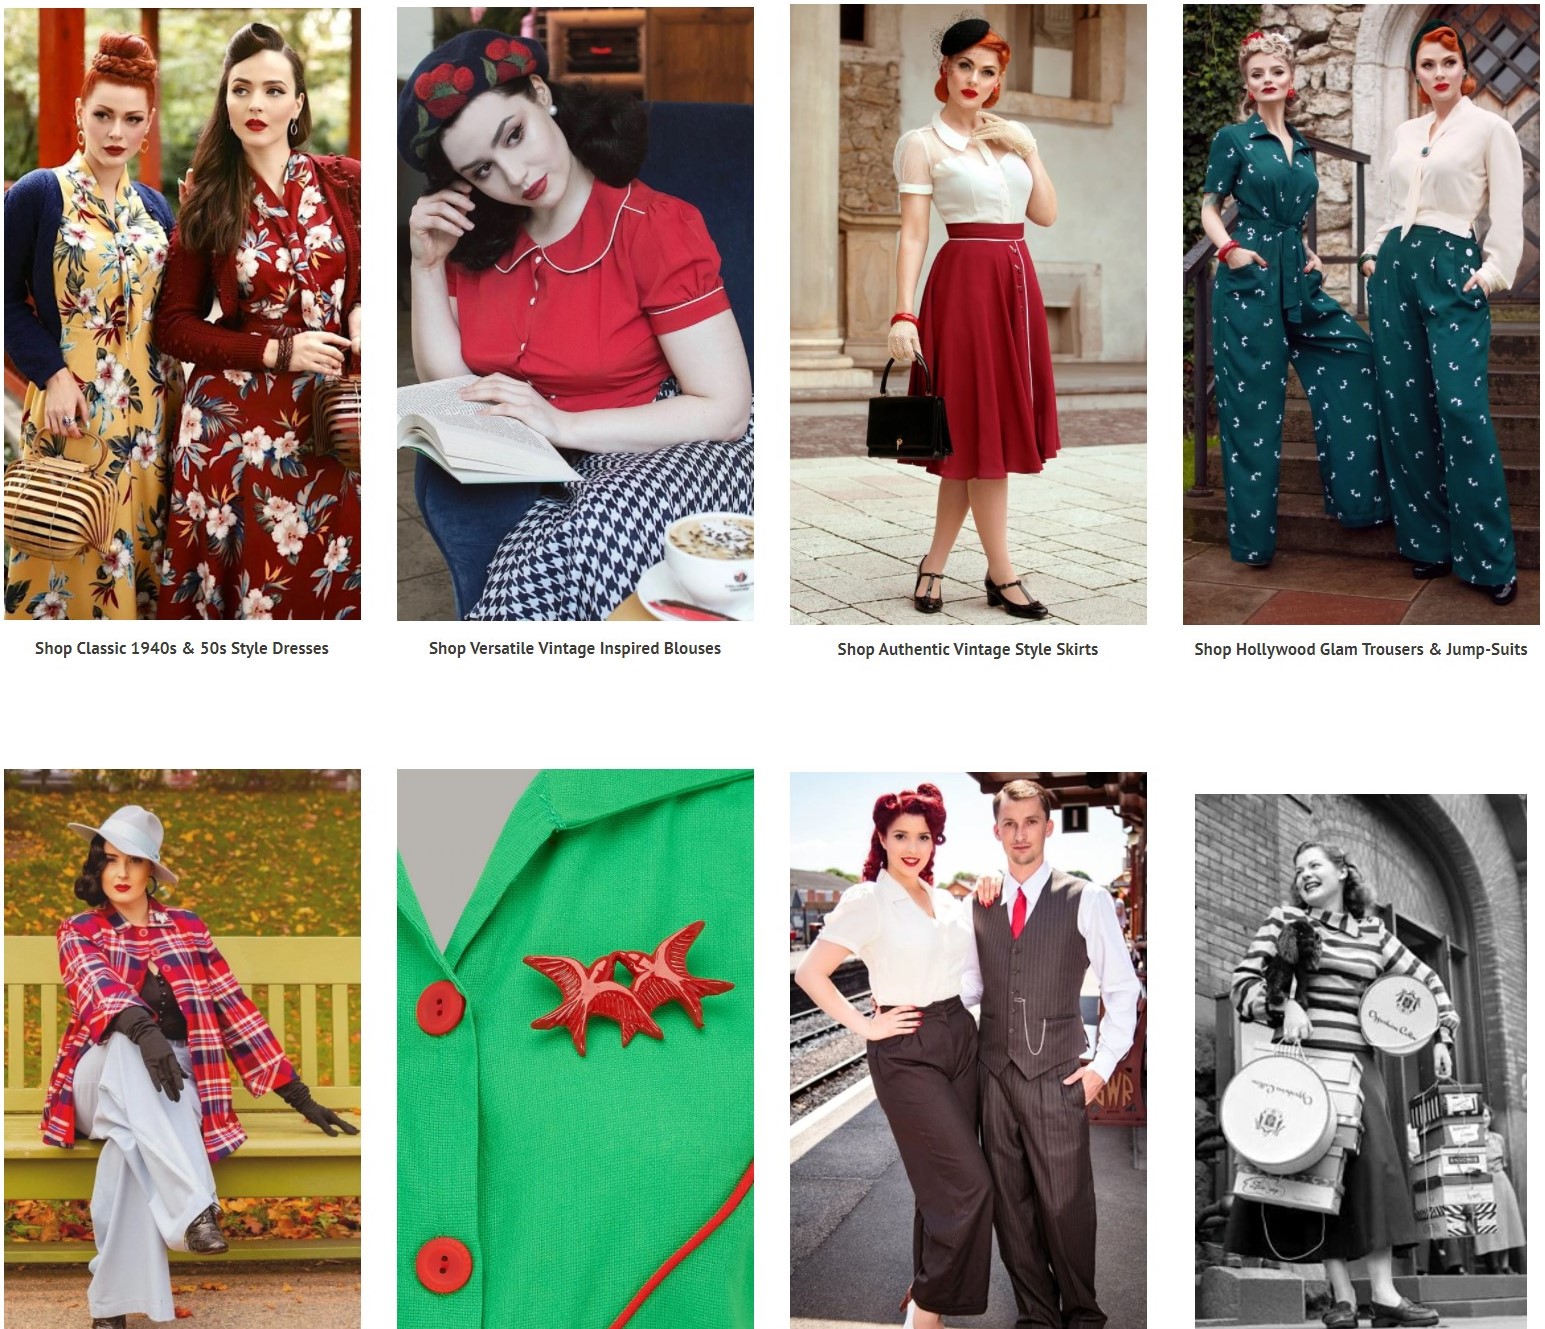 Vintage Clothing Era's & Styles  Women's Vintage Clothing & Accessories